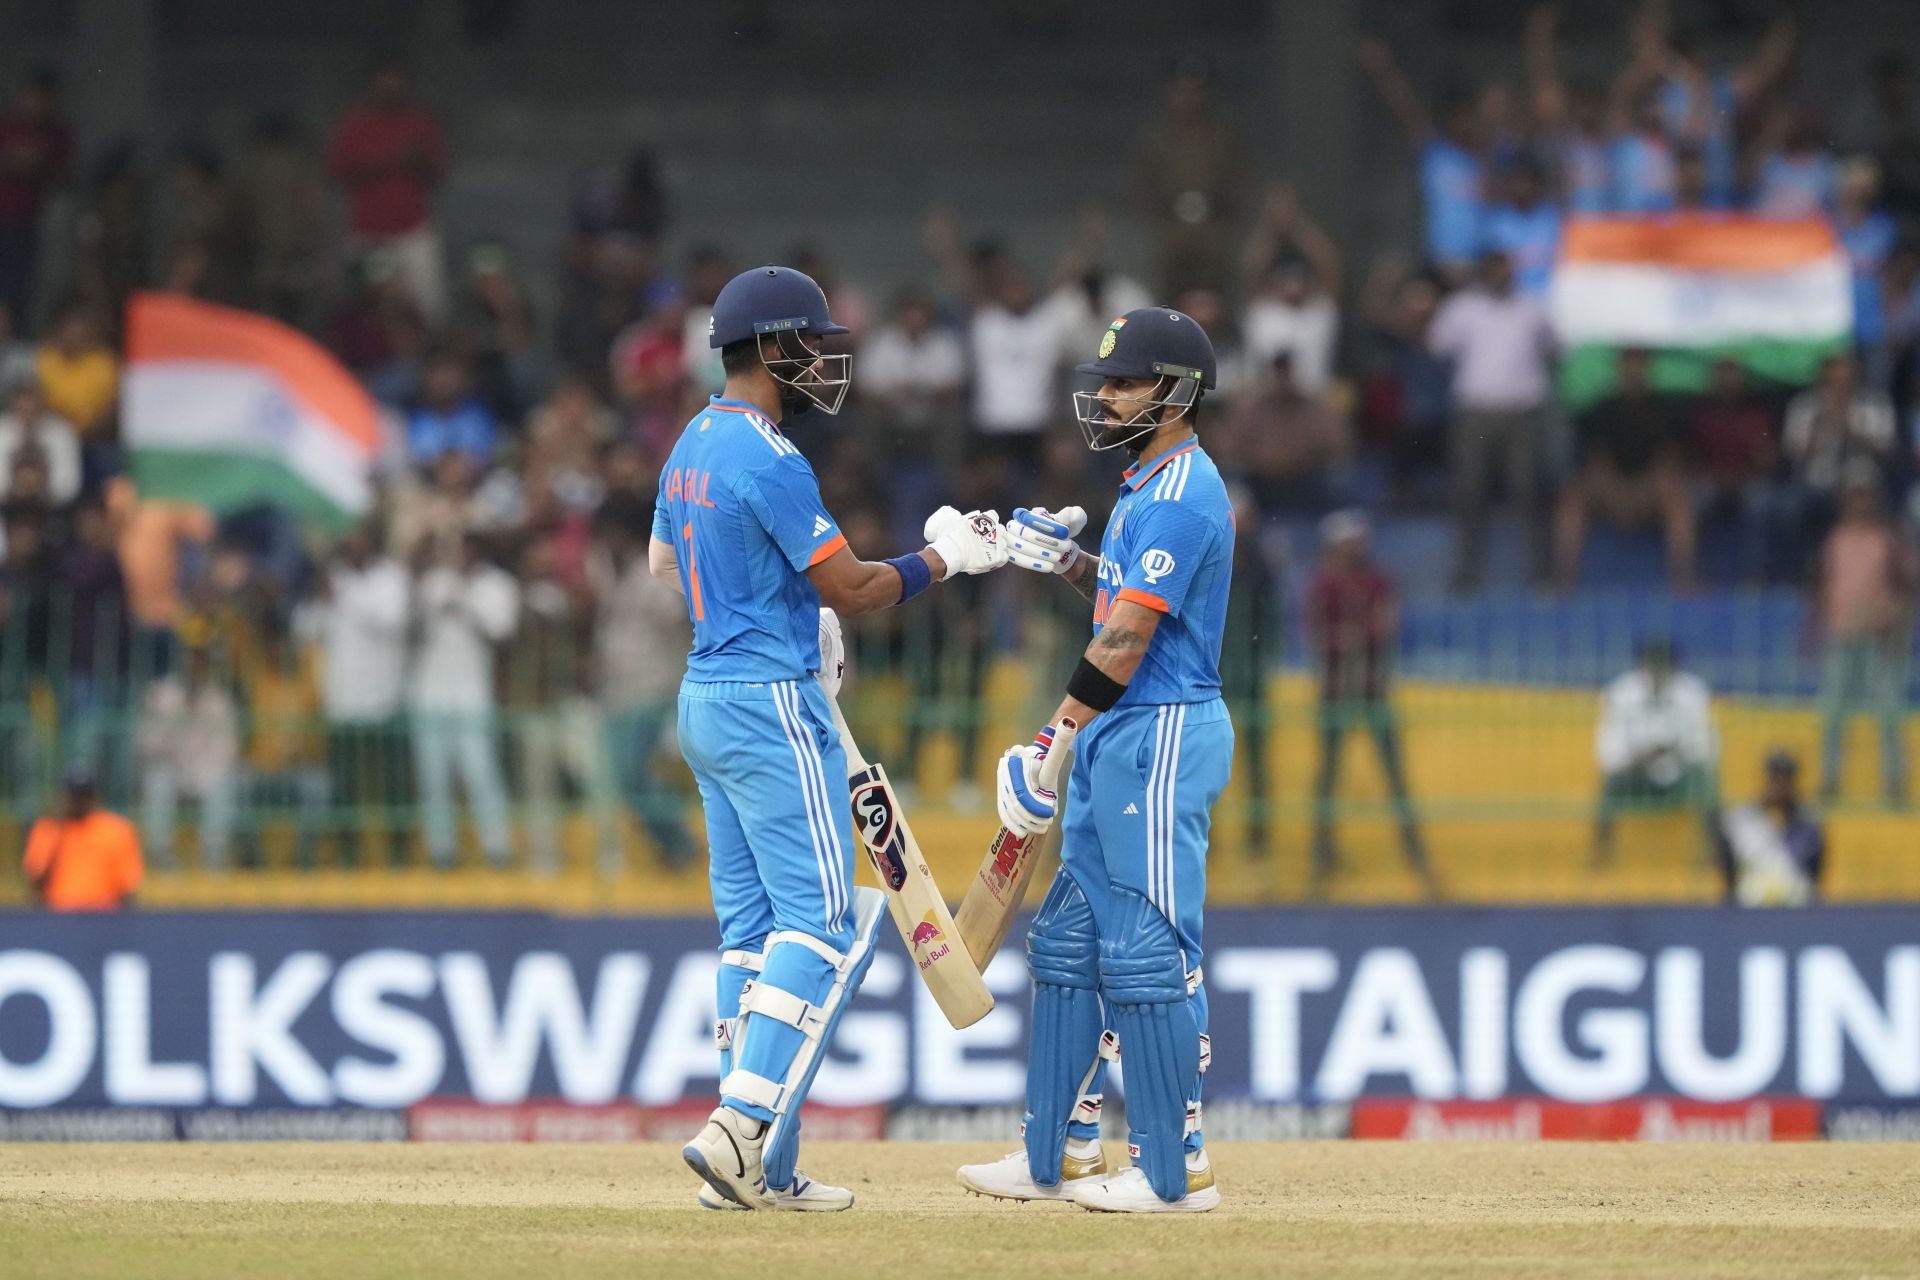 KL Rahul (left) and Virat Kohli featured in an unbroken 233-run stand for the third wicket, a record for the highest partnership for India against Pakistan in ODIs. The previous best was 231 by Navjot Singh Sidhu and Sachin Tendulkar in Sharjah in 1996. (Pic: AP Photo/Eranga Jayawardena)